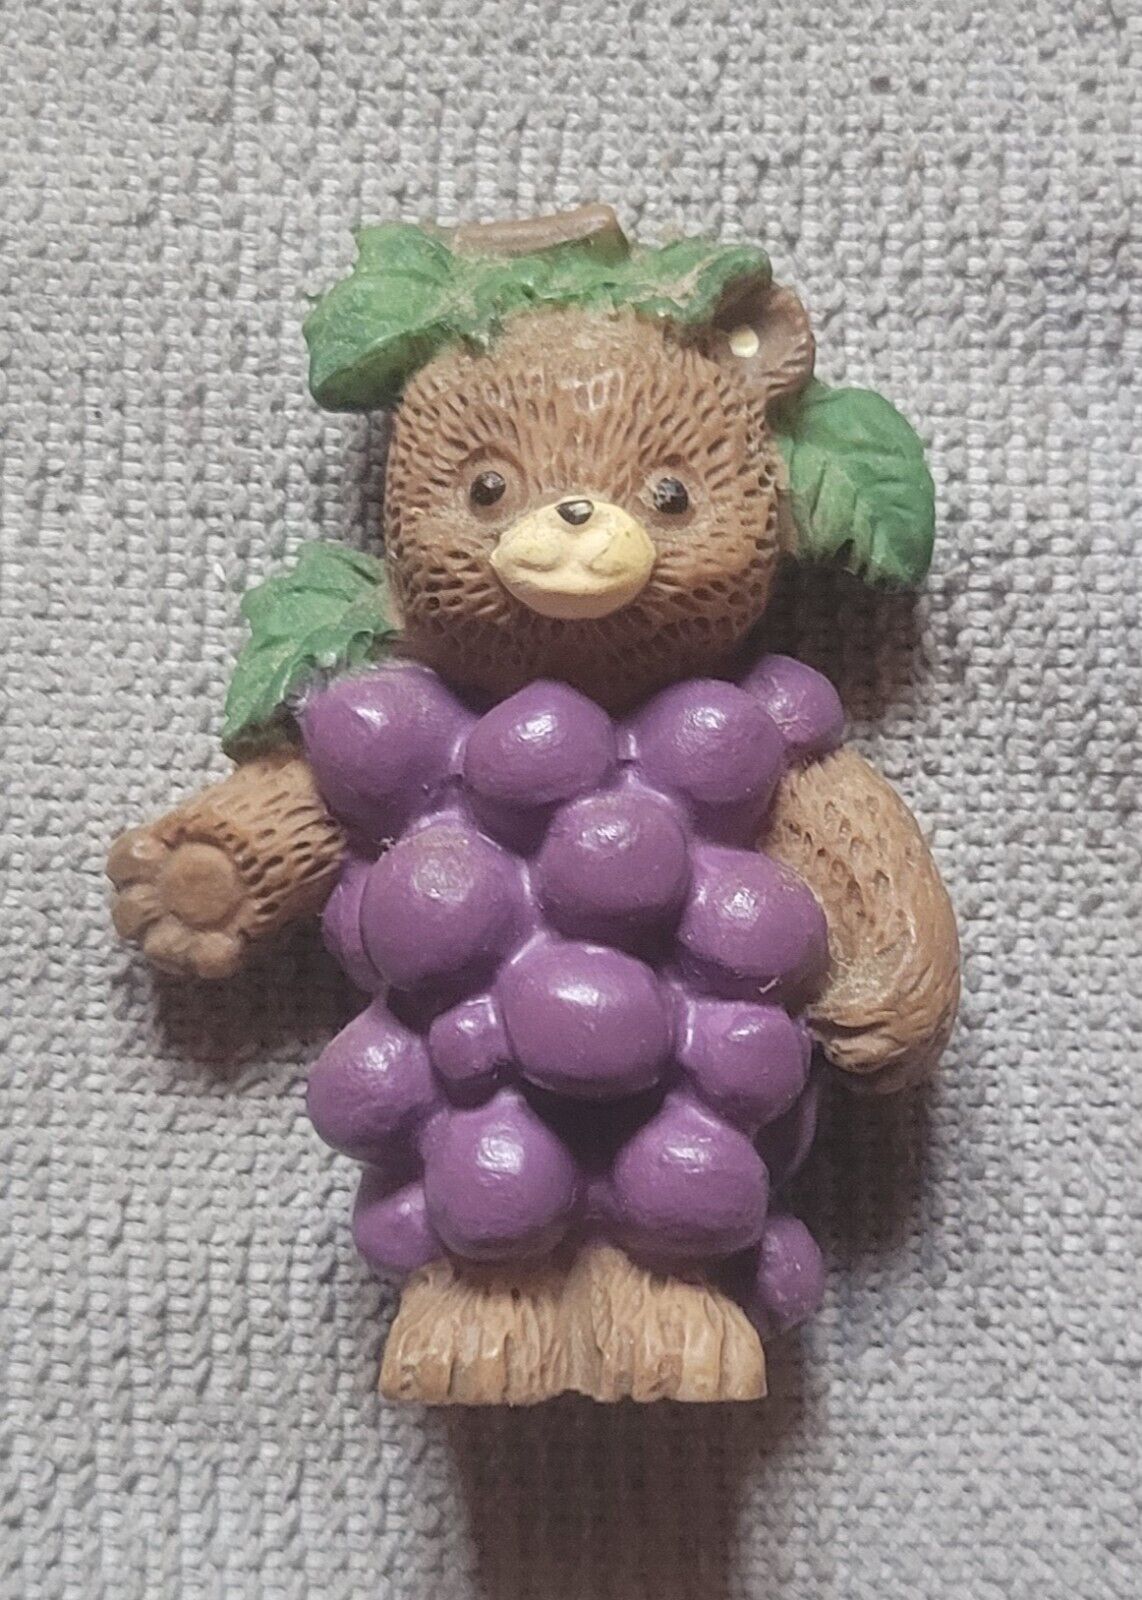 Bear Wearing Grape Outfit Refrigerator Magnet Novelty Resin 